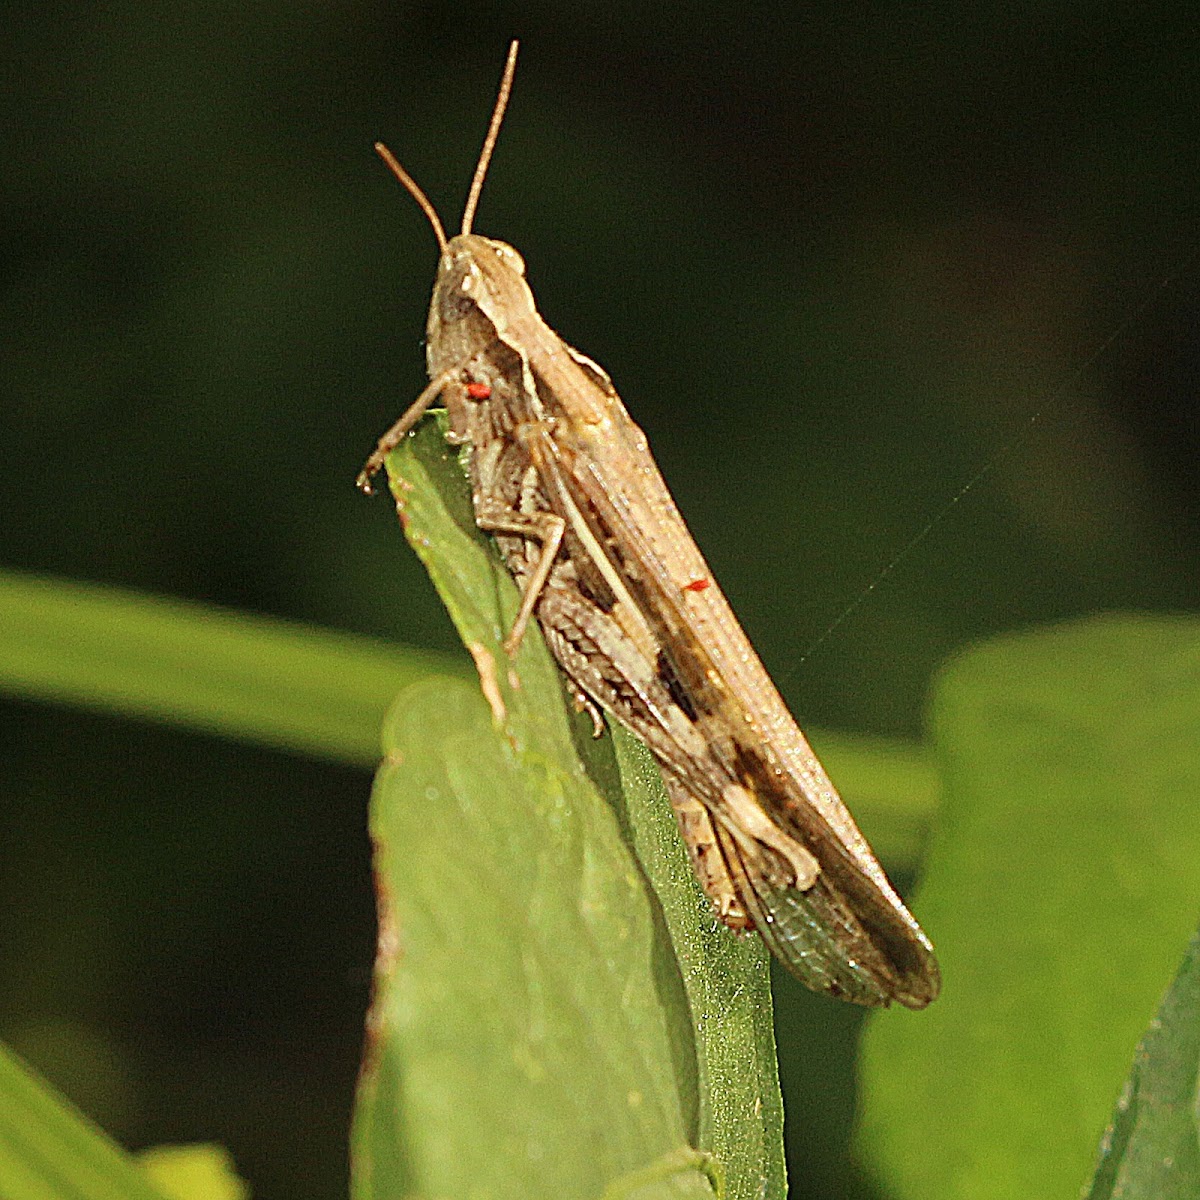 Grasshopper with Parasitic Mites